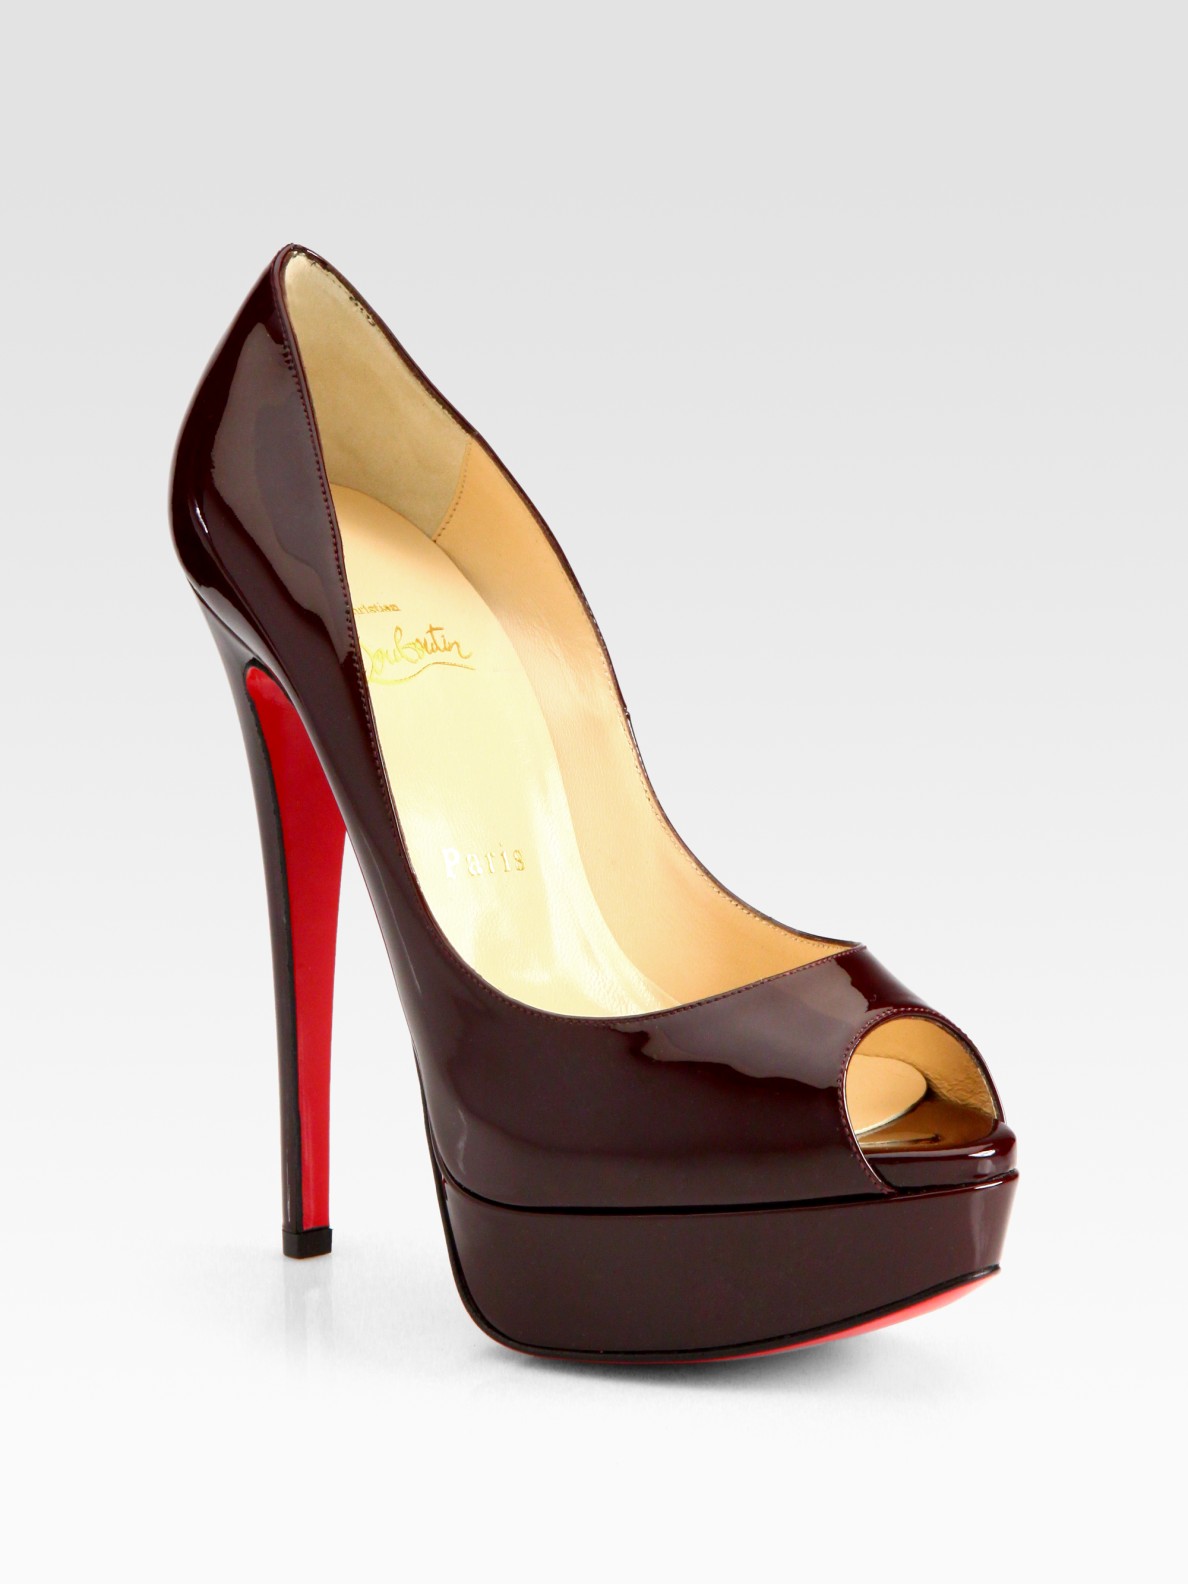 Christian louboutin Lady Peep Toe Patent Leather Pumps in Purple ...